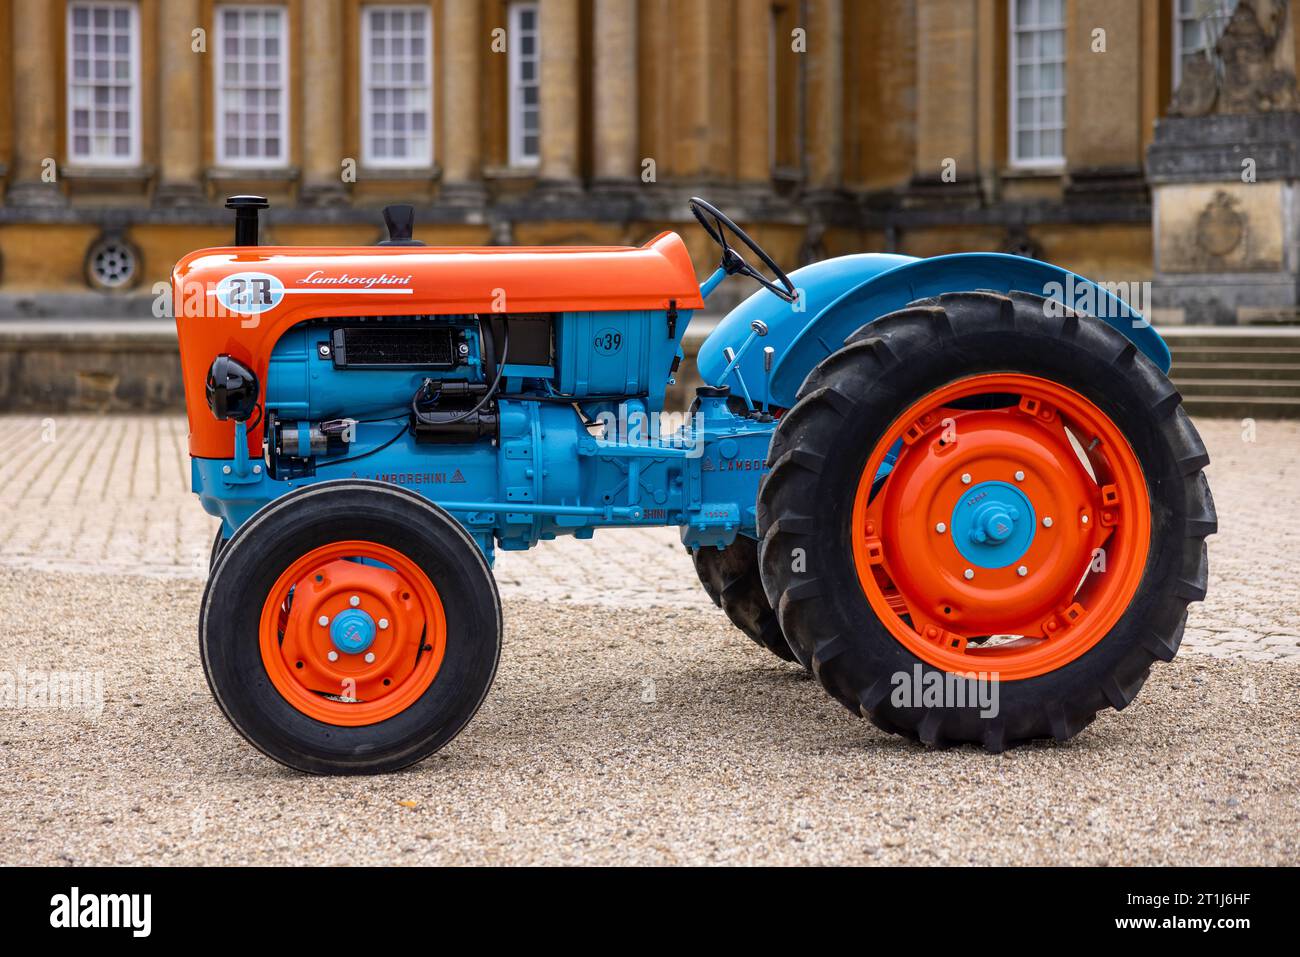 1964 Lamborghini 2R Tractor, on display at the Salon Privé Concours d’Elégance motor show held at Blenheim Palace. Stock Photo